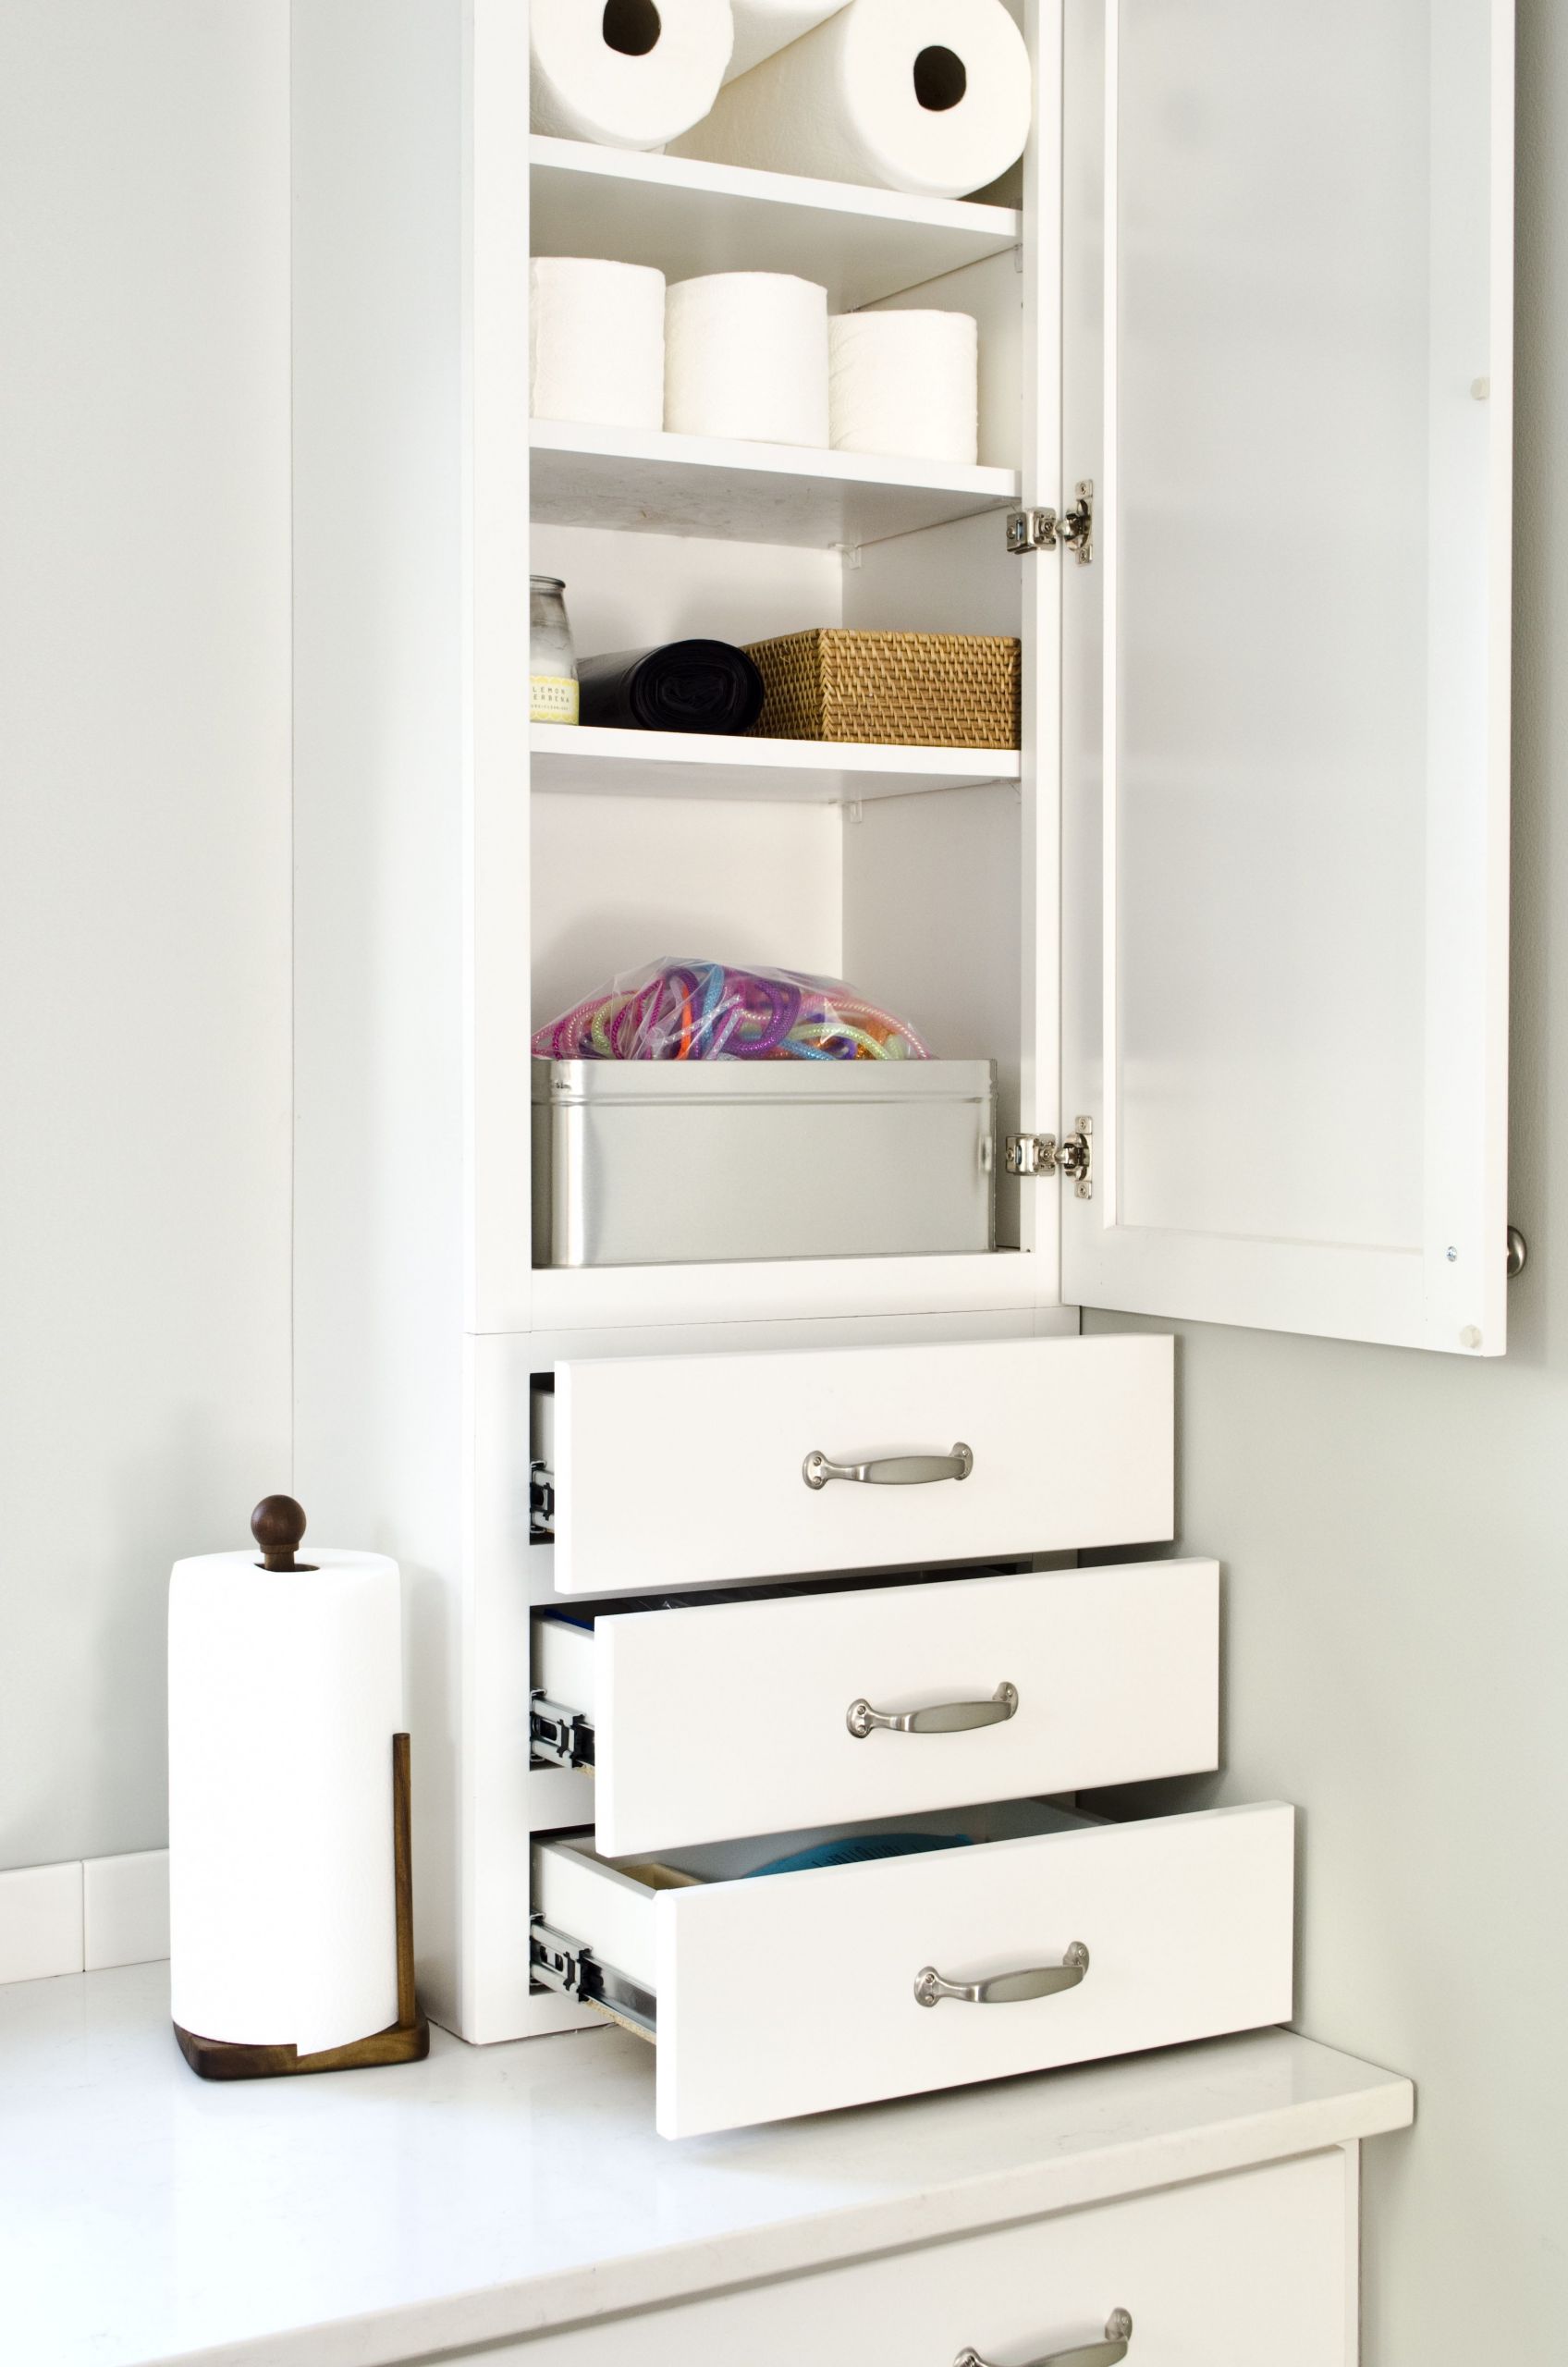 Bathroom Wall Cabinet With Drawers
 This drawer stack and wall cabinet bination by